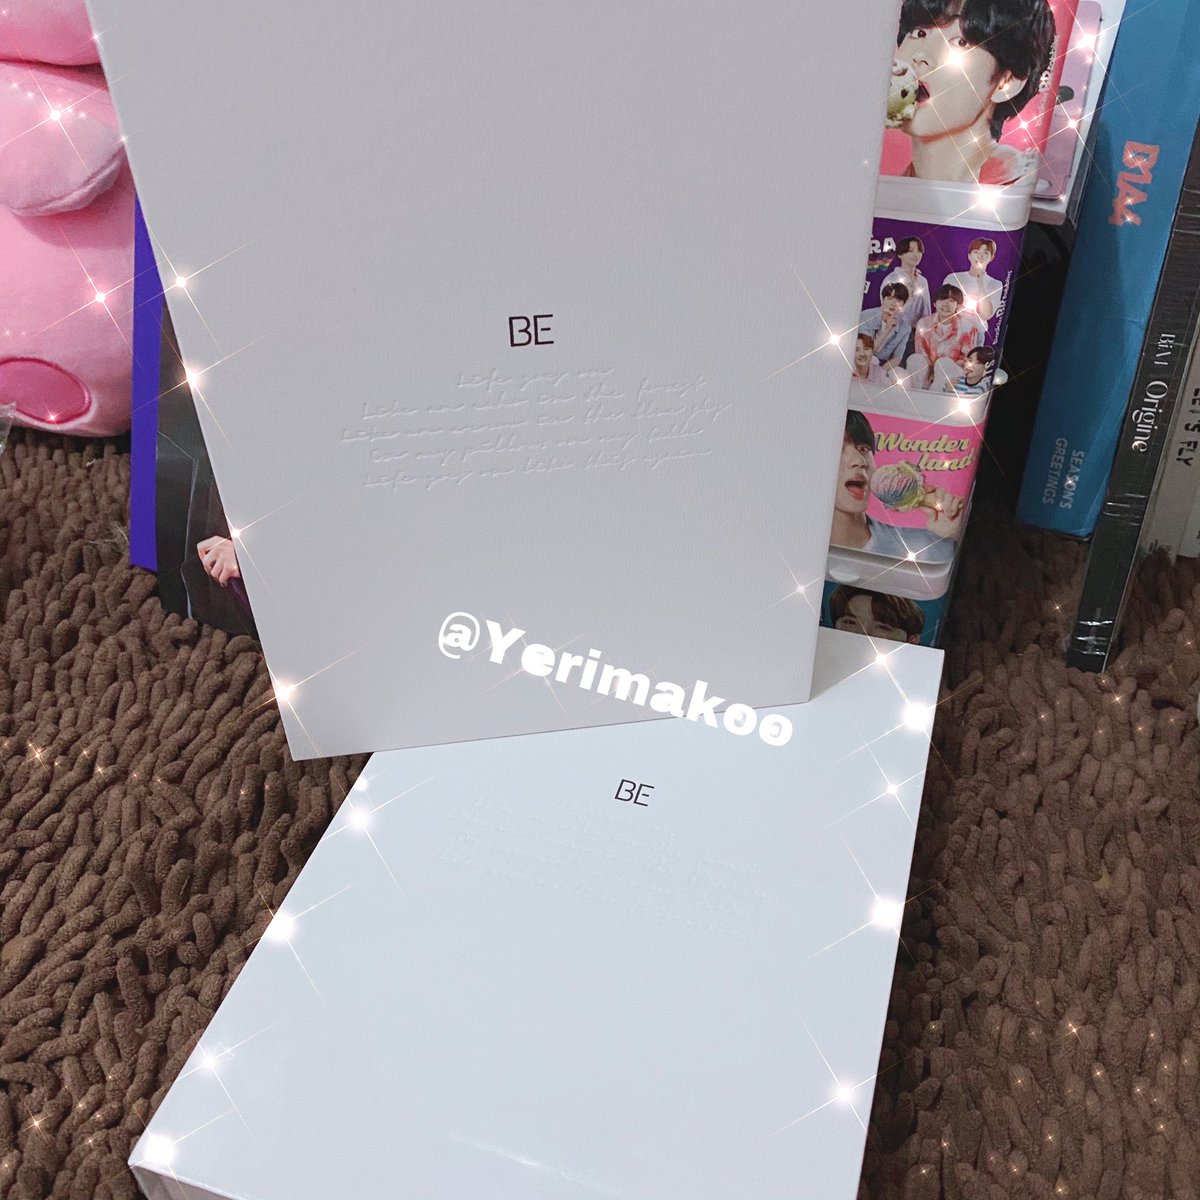 GIVEAWAY BTS BE Deluxe Edition Album fullset💜

RT & Like
Followers only

End soon💜
Goodluck🎡✨